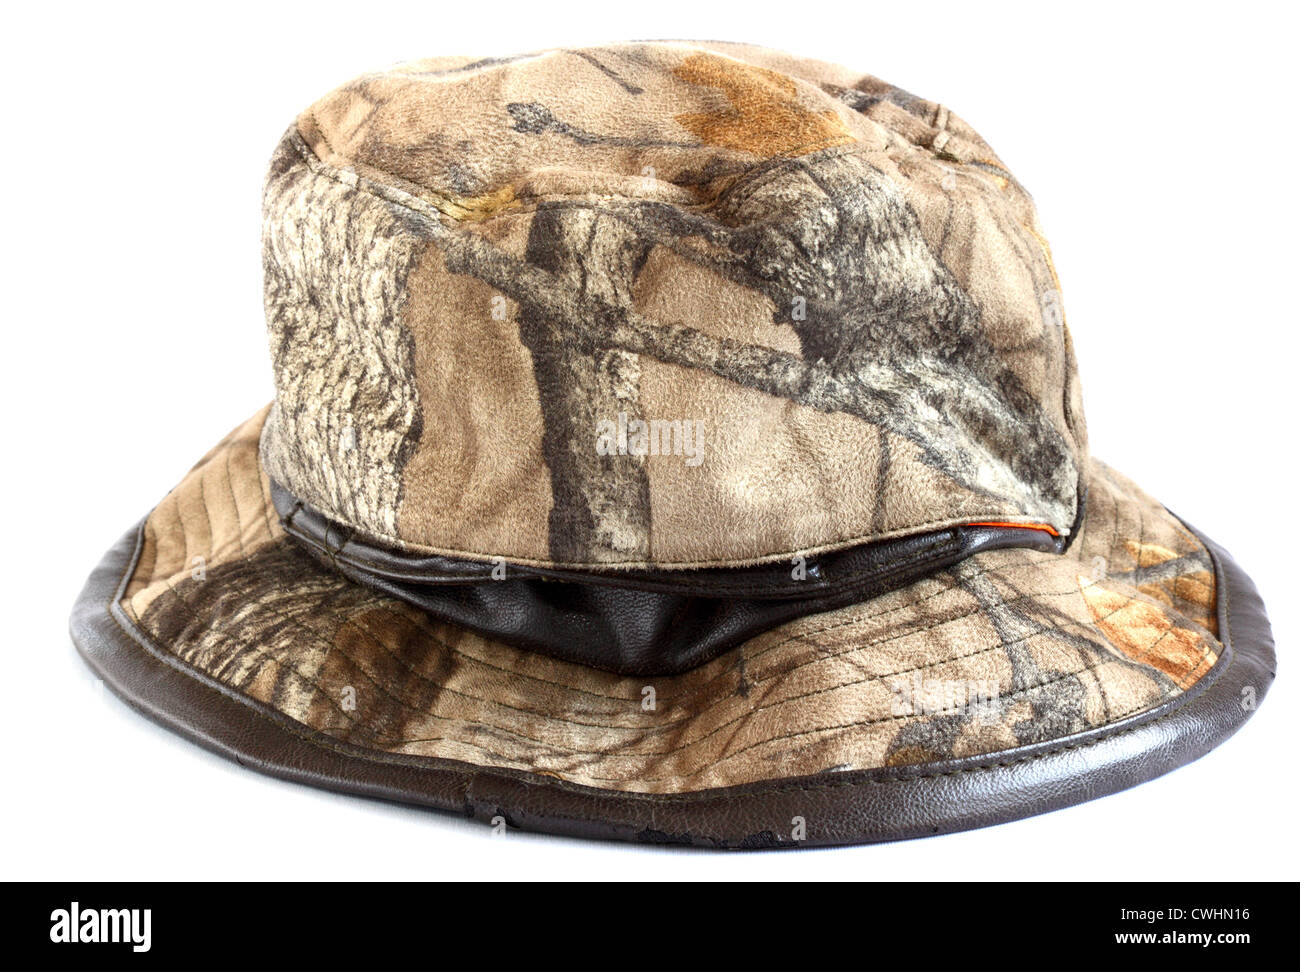 https://c8.alamy.com/comp/CWHN16/camouflage-hunting-hat-over-whte-background-CWHN16.jpg